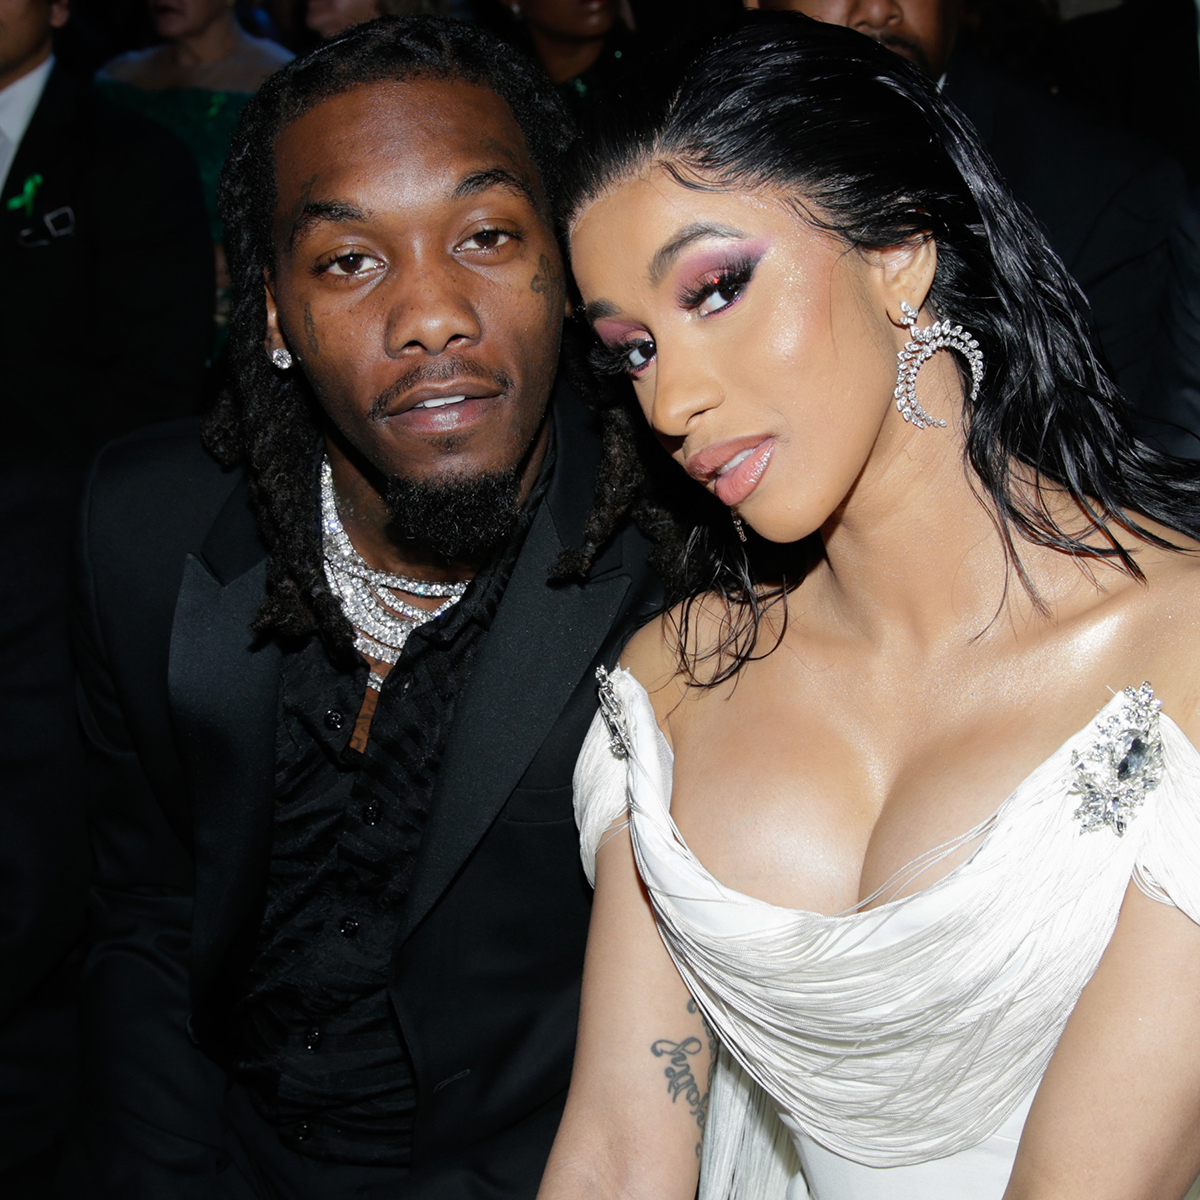 Cardi B Calls Out Offset’s “Stupid” Cheating Allegations